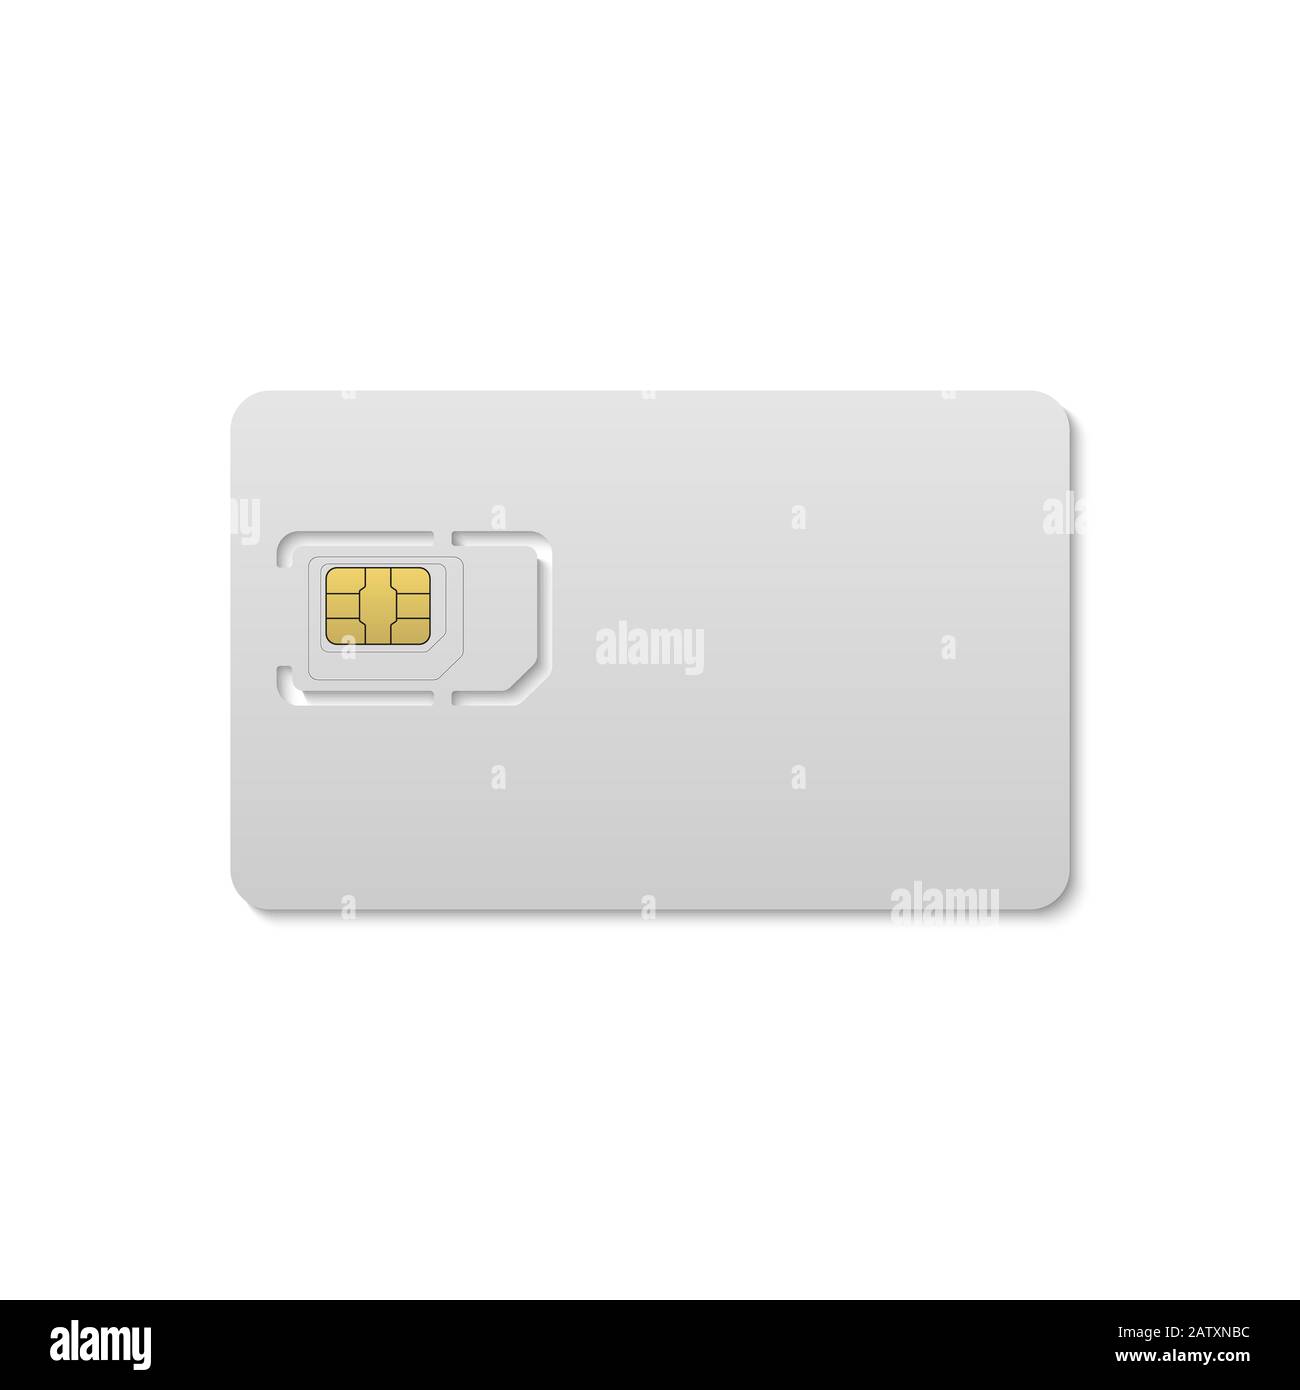 Mobile sim card. Phone siimcard chip isolated Stock Vector